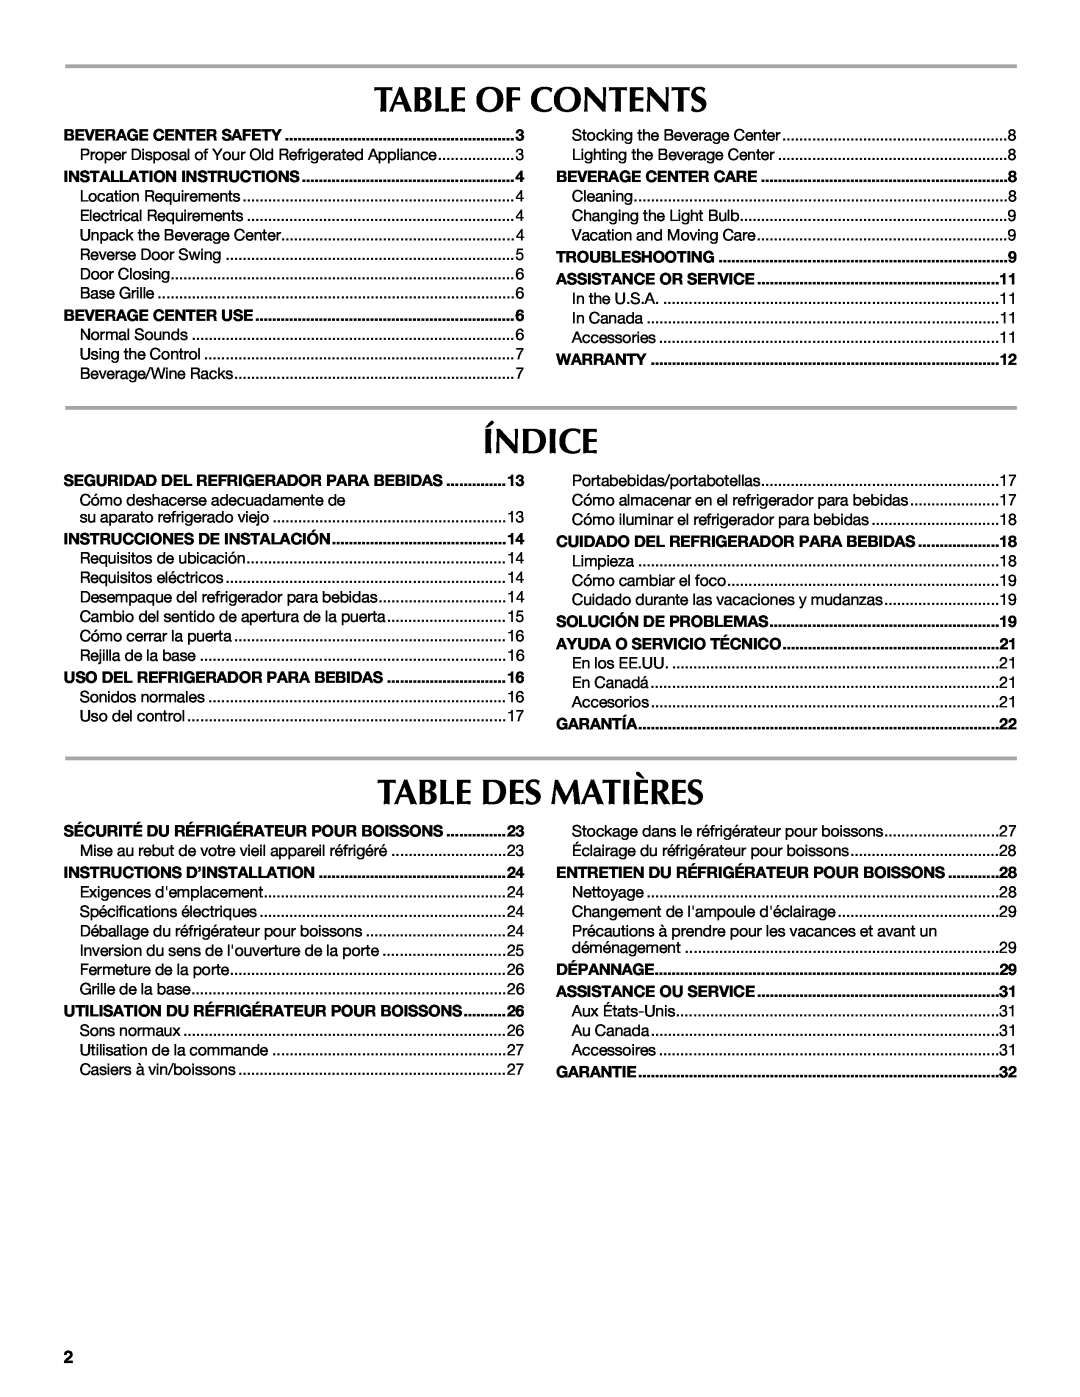 Maytag W10285880A - 8336411962010 manual Table Of Contents, Índice, Table Des Matières 